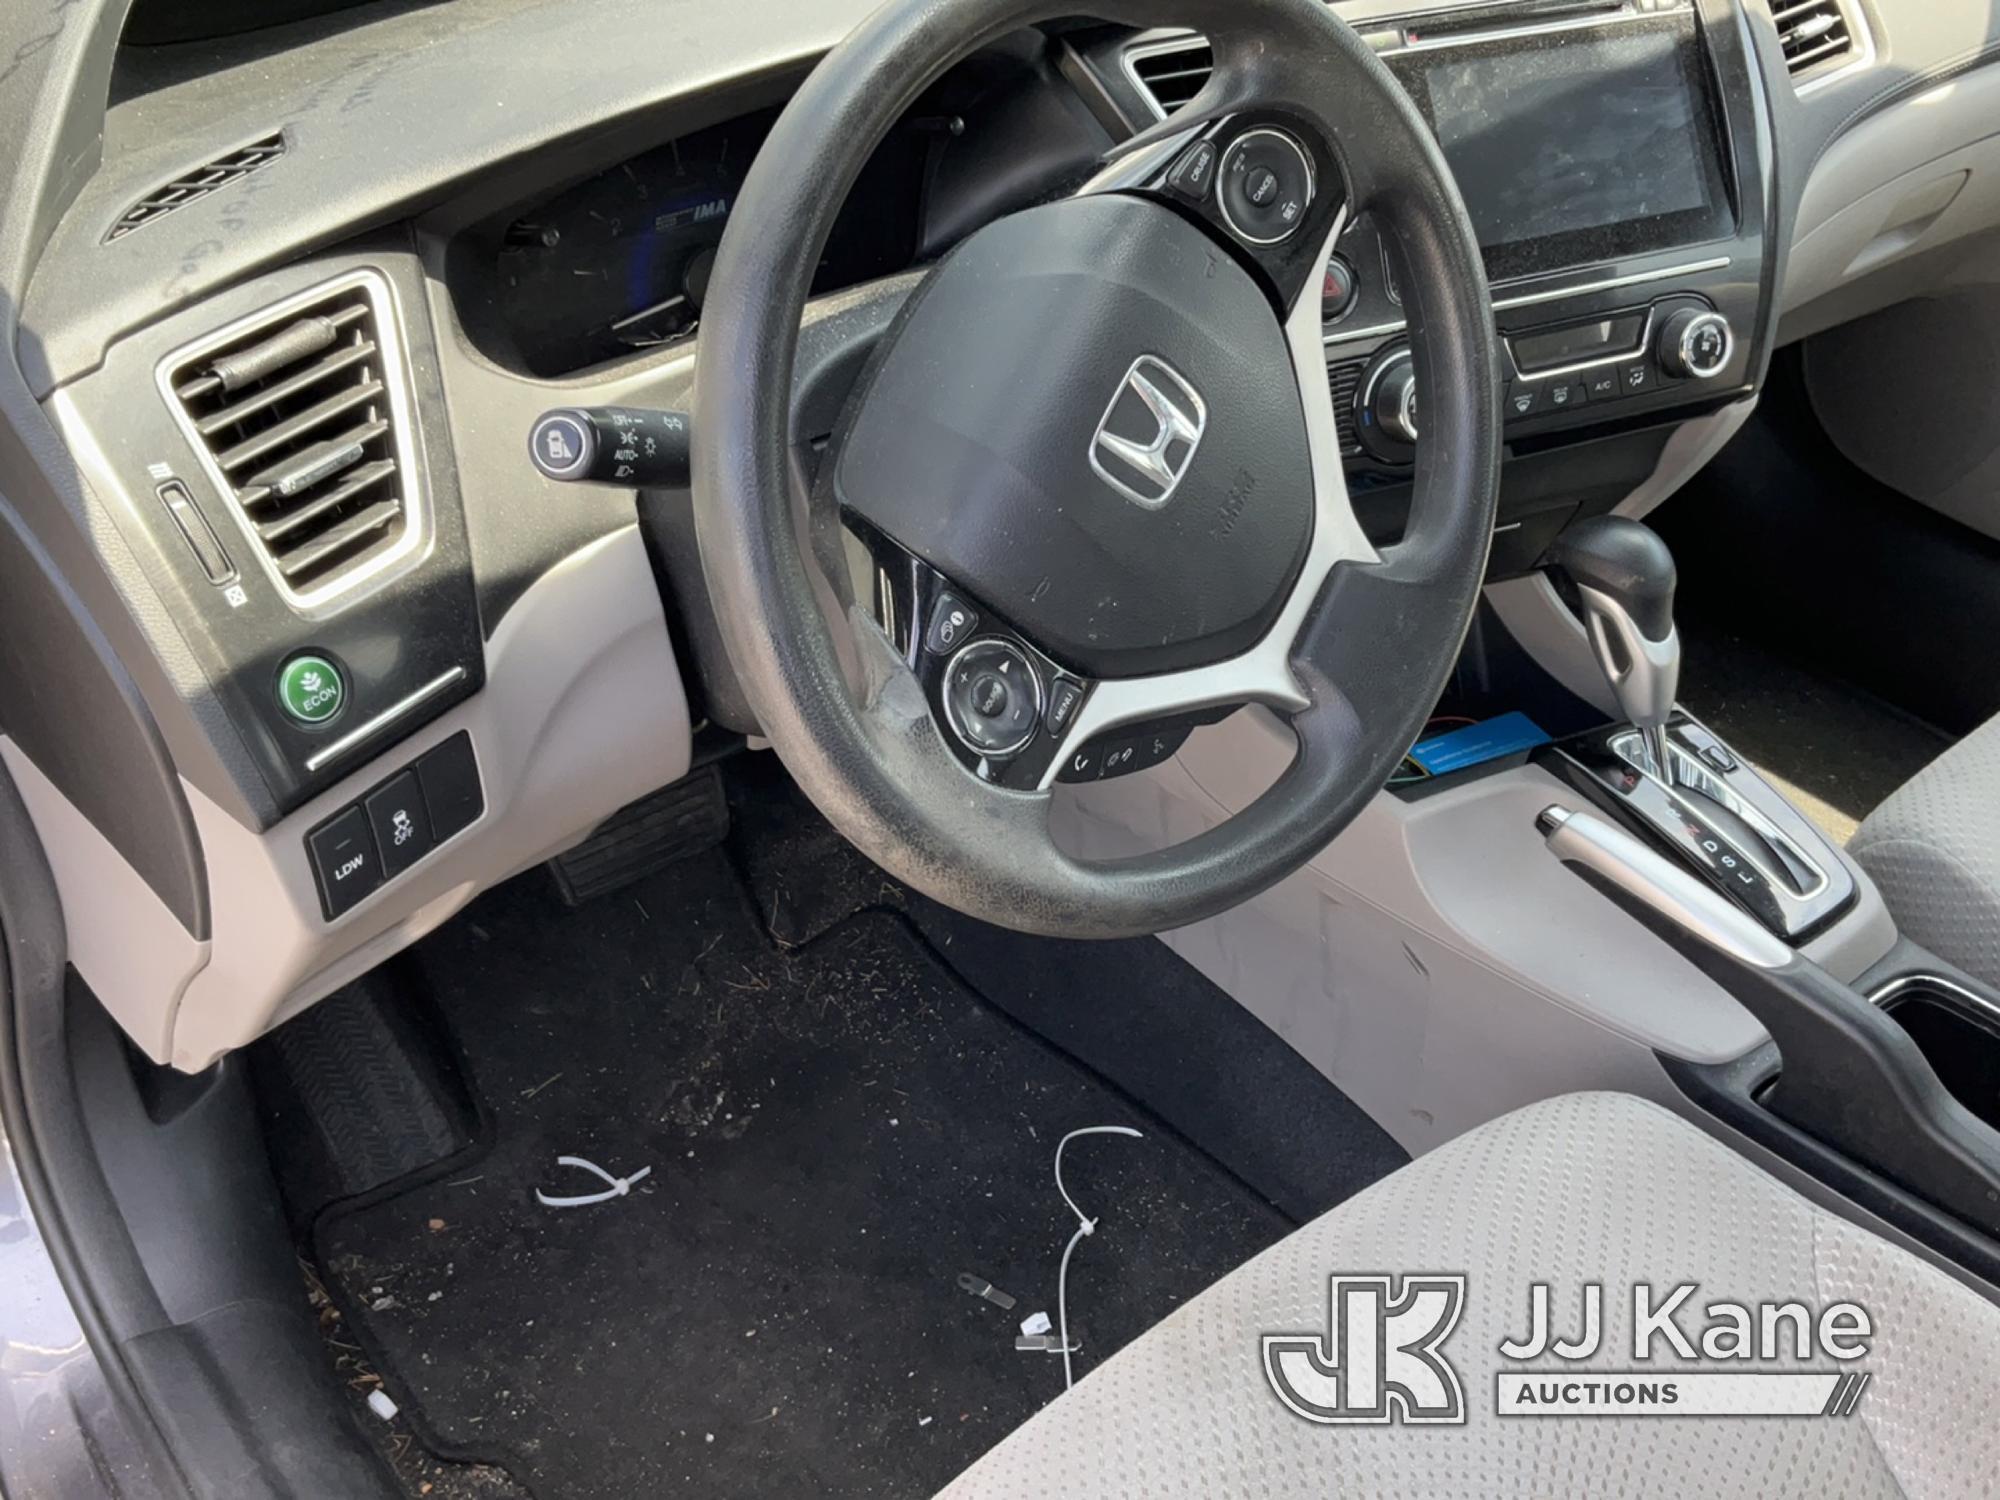 (Chester Springs, PA) 2015 Honda Civic Hybrid 4-Door Sedan Did Run & Move, Out of gas, Not Running,